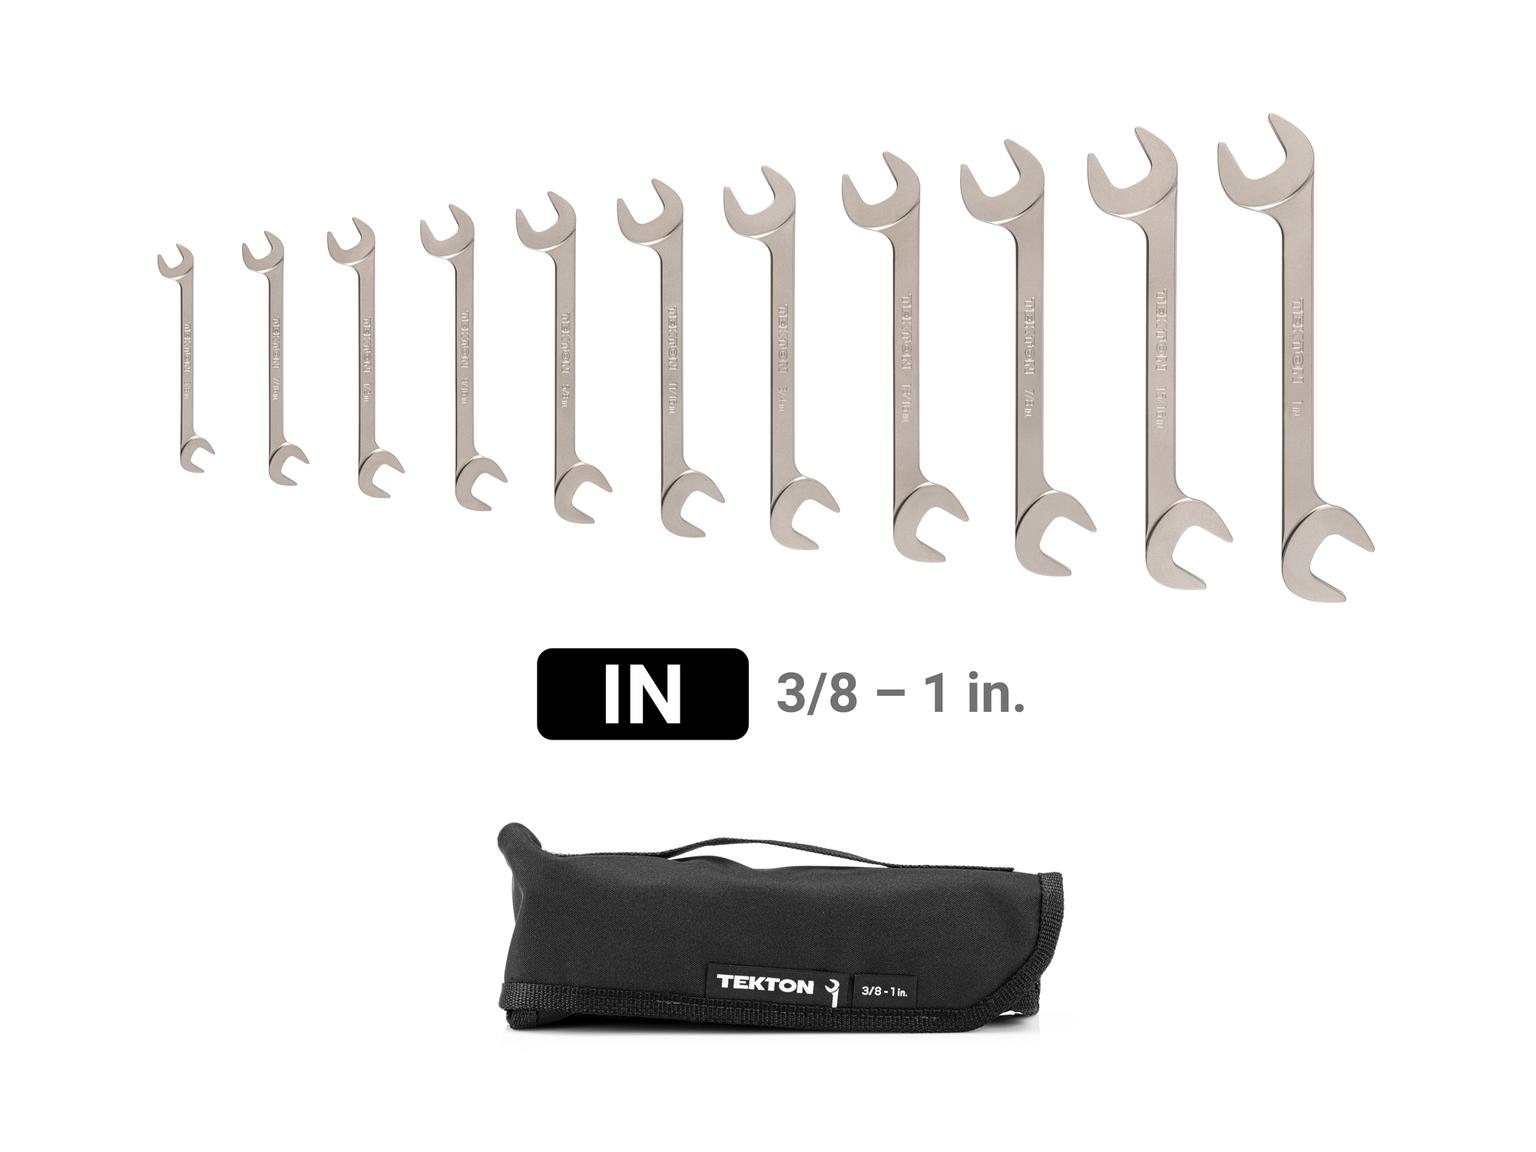 TEKTON WAE91402-T Angle Head Open End Wrench Set with Pouch, 11-Piece (3/8-1 in.)